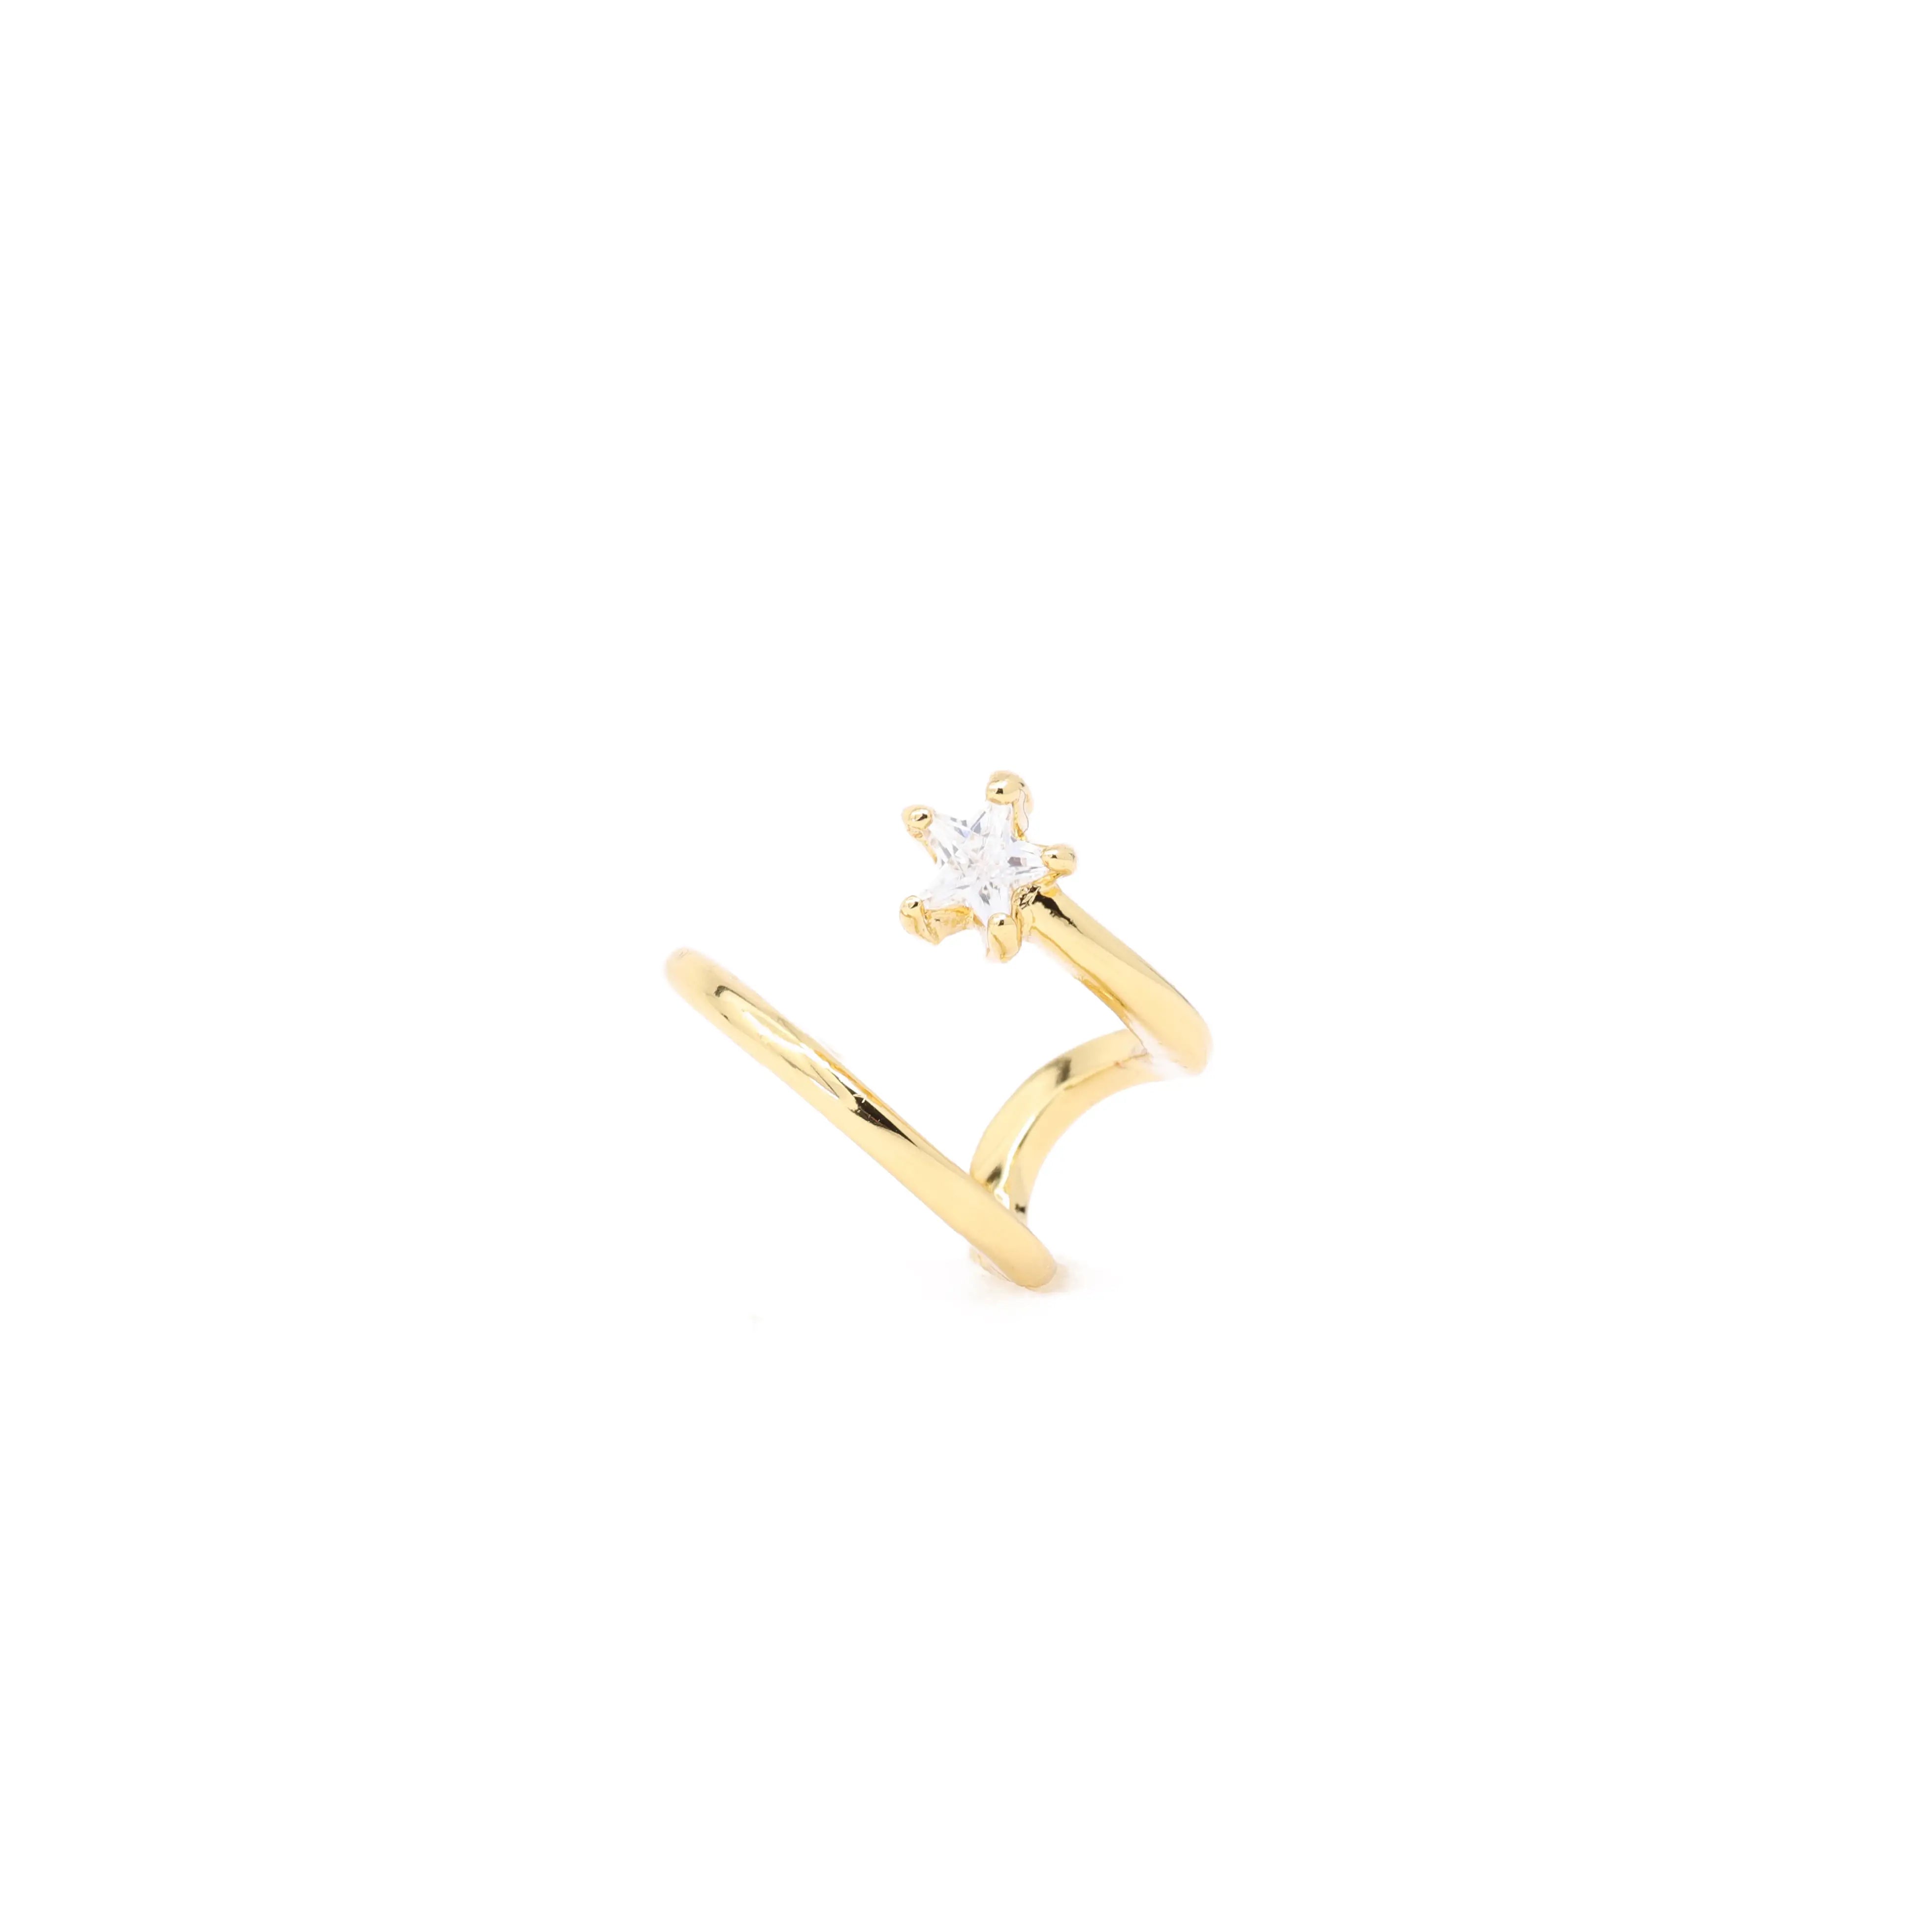 shooting star ear cuff in gold by land of salt